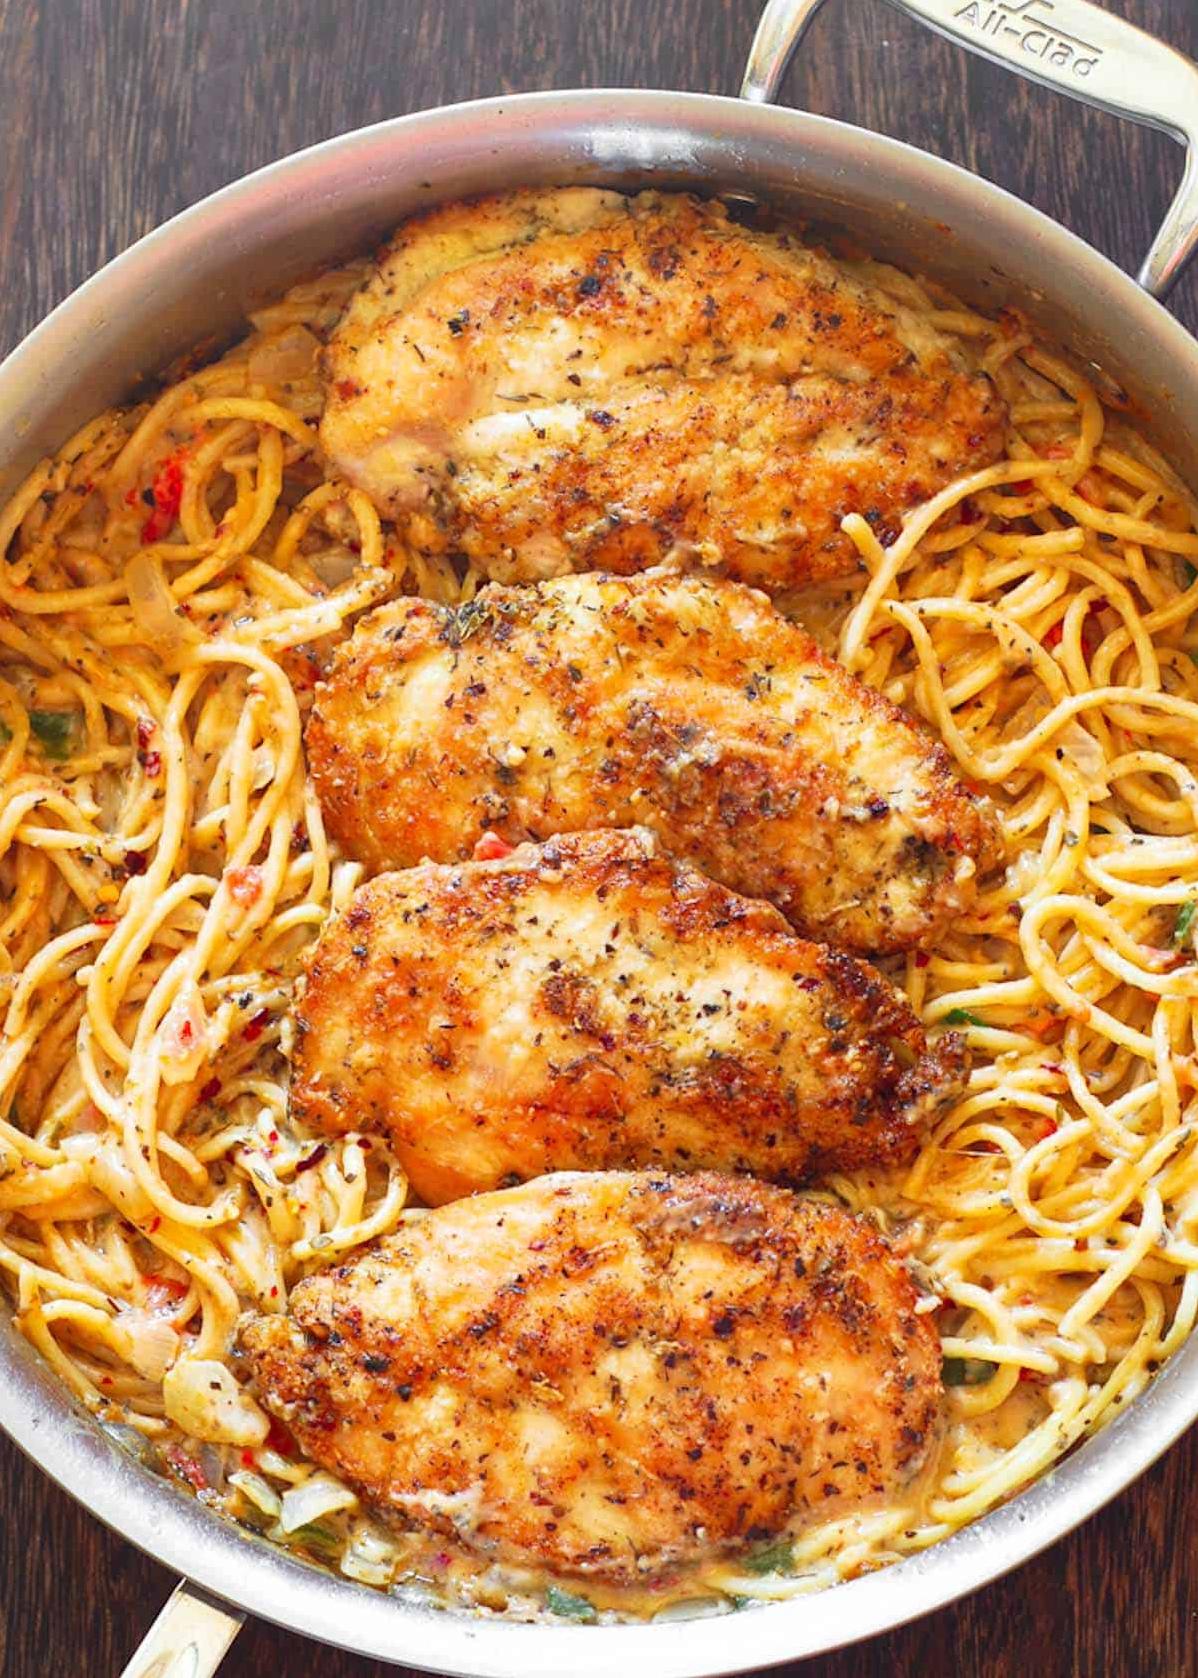  The combination of tender chicken and al dente noodles is simply divine.